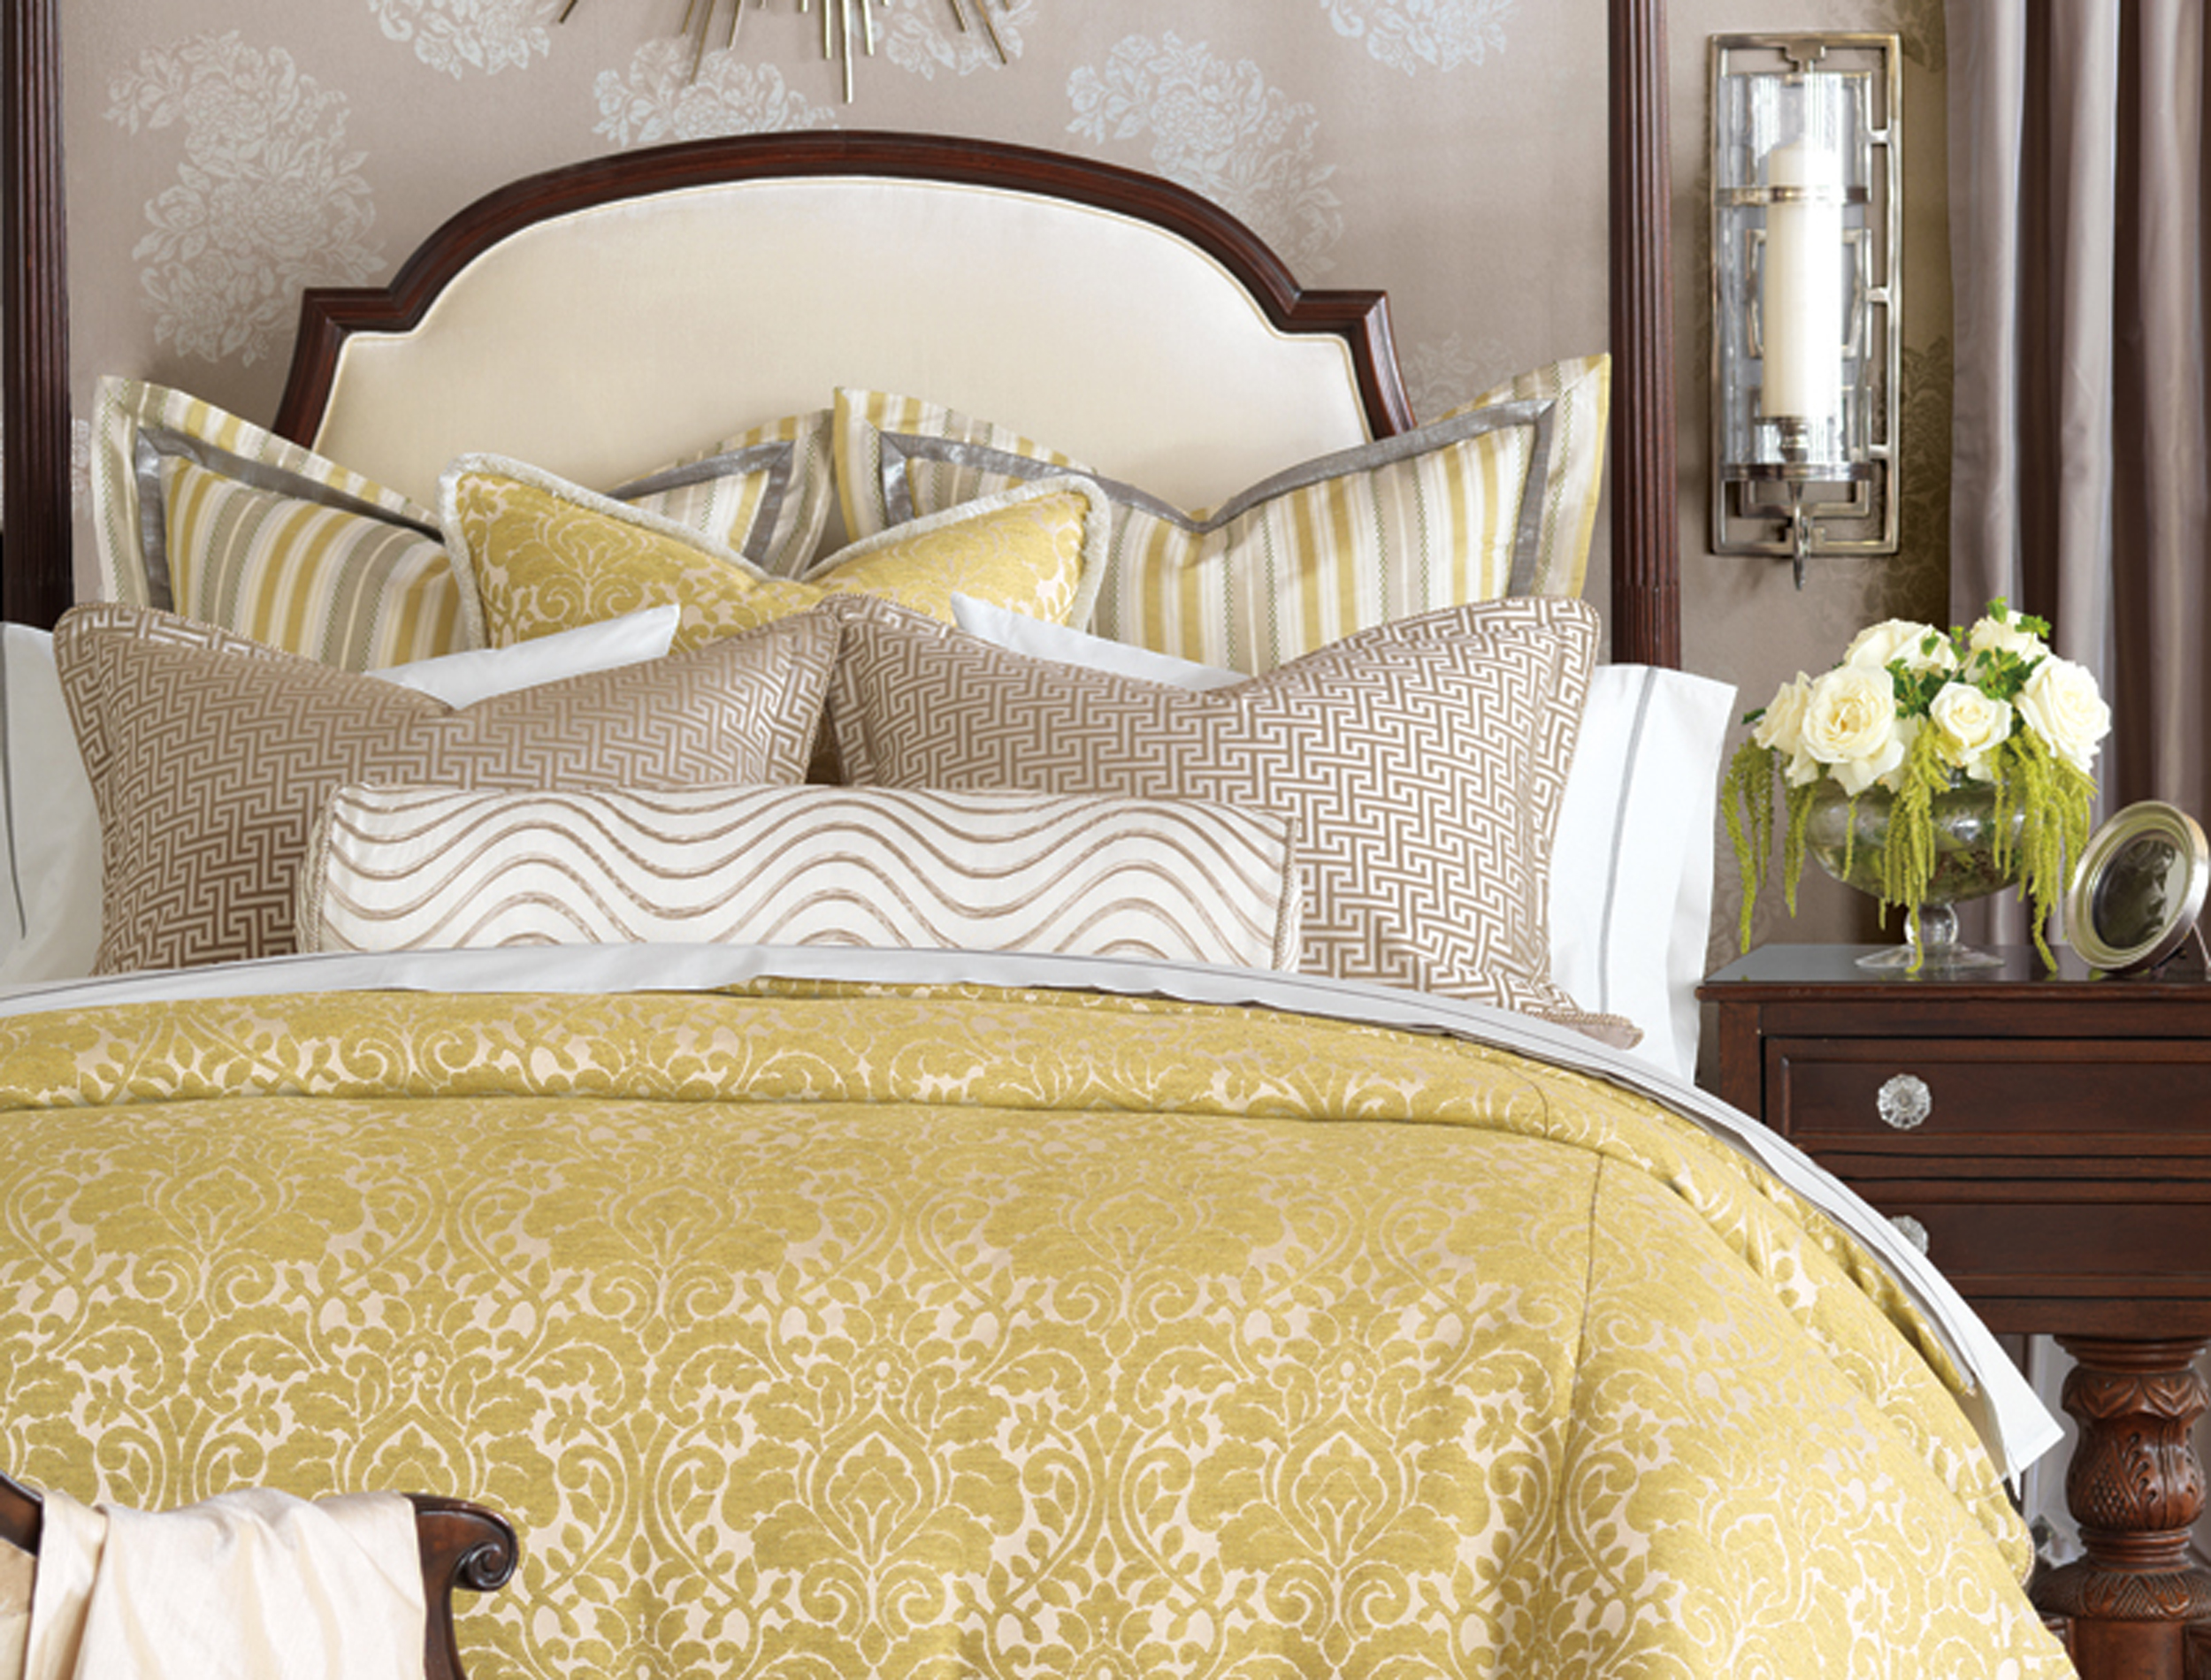 Eastern Accents Bedding